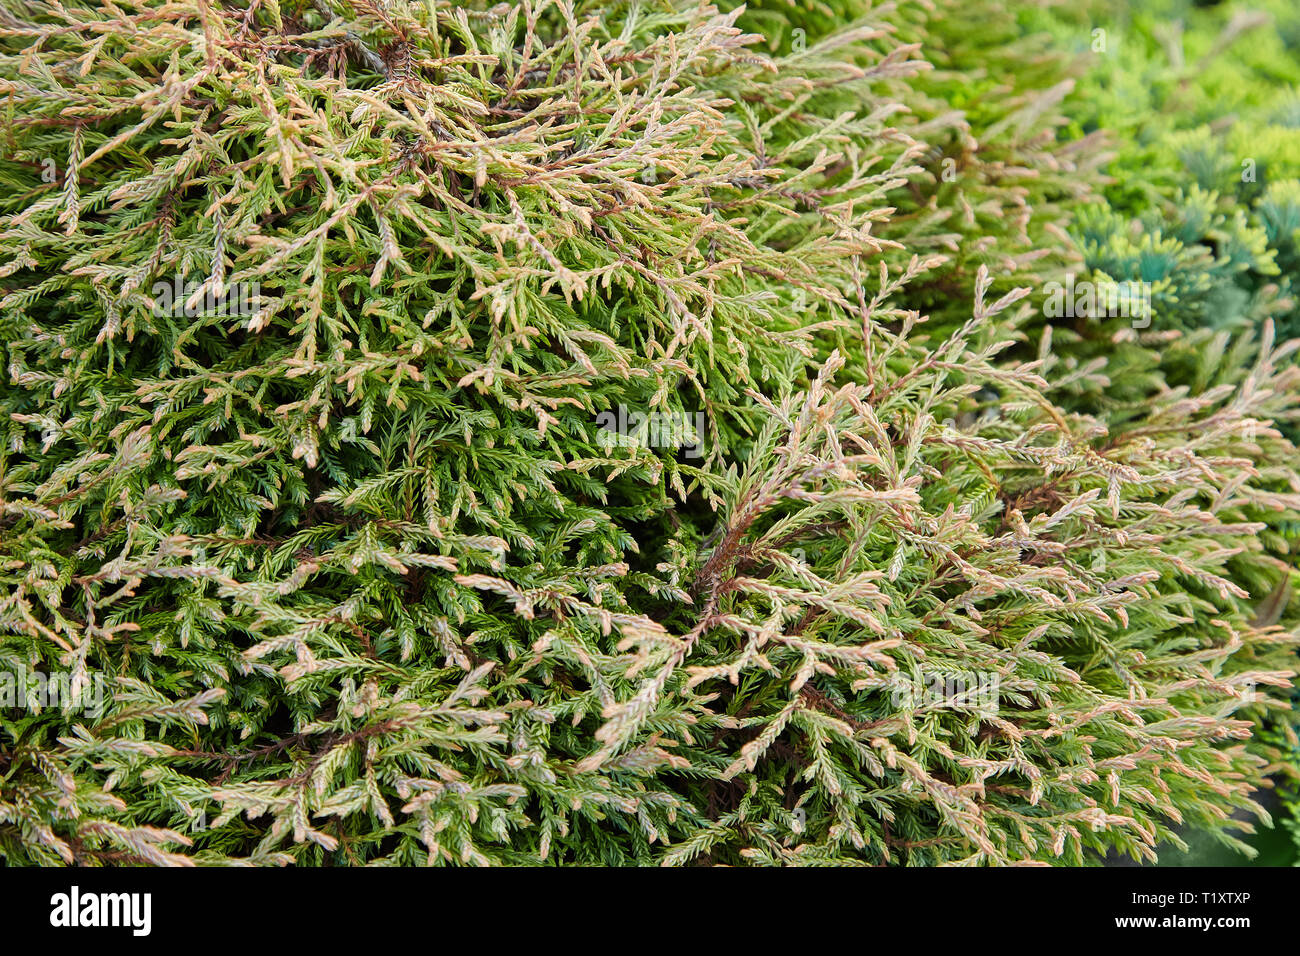 Platycladus orientalis (also known as Chinese thuja, Oriental arborvitae, Chinese arborvitae, biota or oriental thuja) Stock Photo